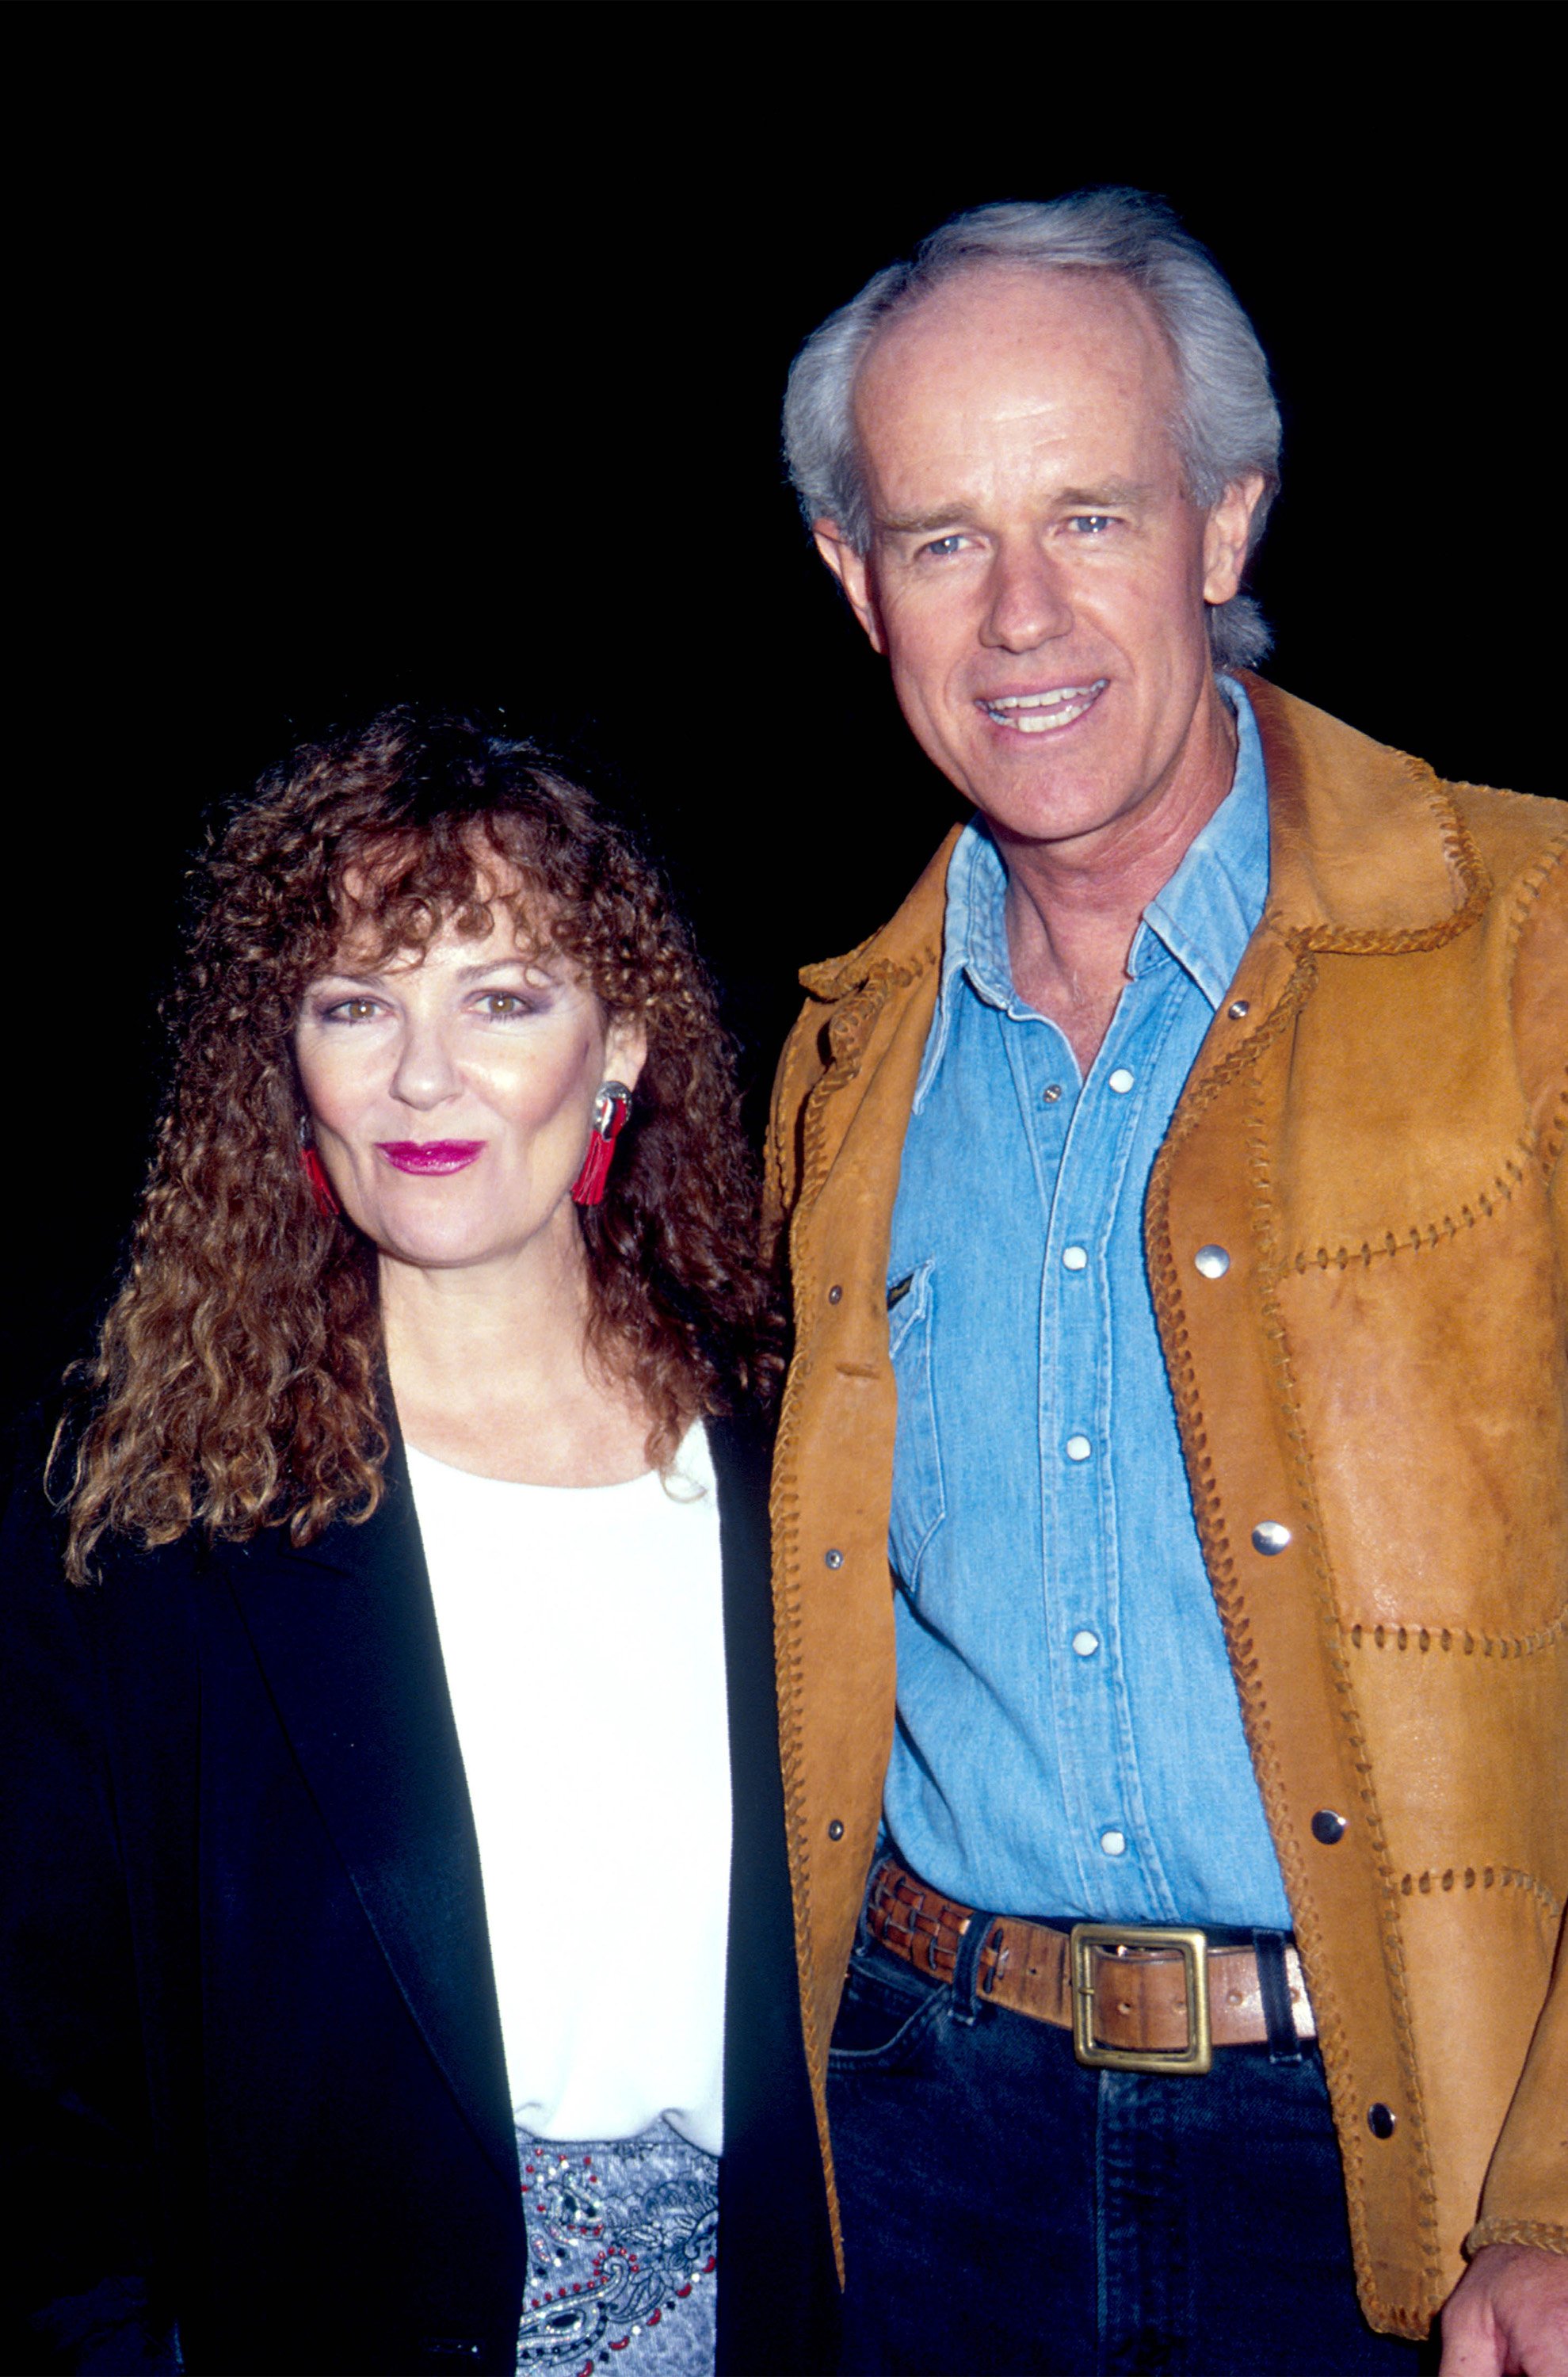 Shelley Fabares and Mike Farrell attend the Scott Newman Foundation event on August 17, 1991 in Los Angeles, California. / Source: Getty Images